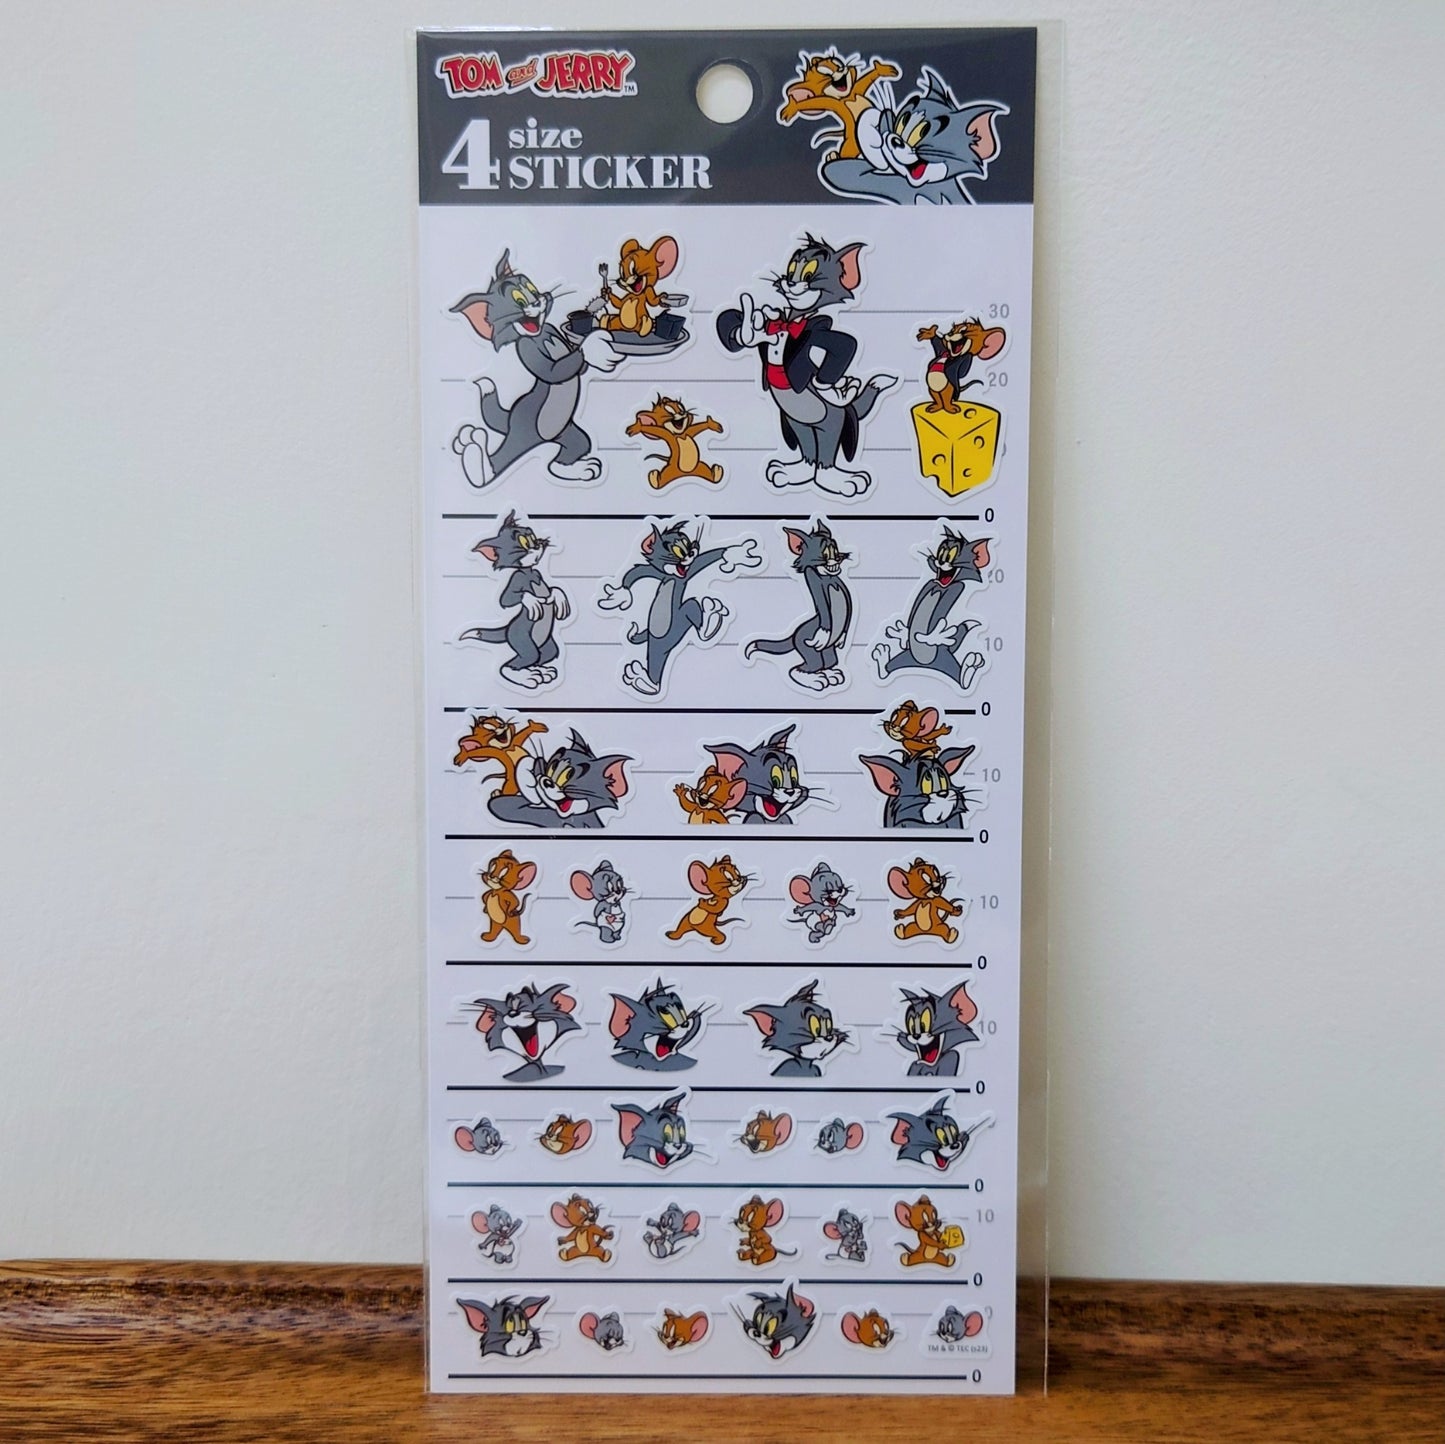 4 size sticker Tom and Jerry 2